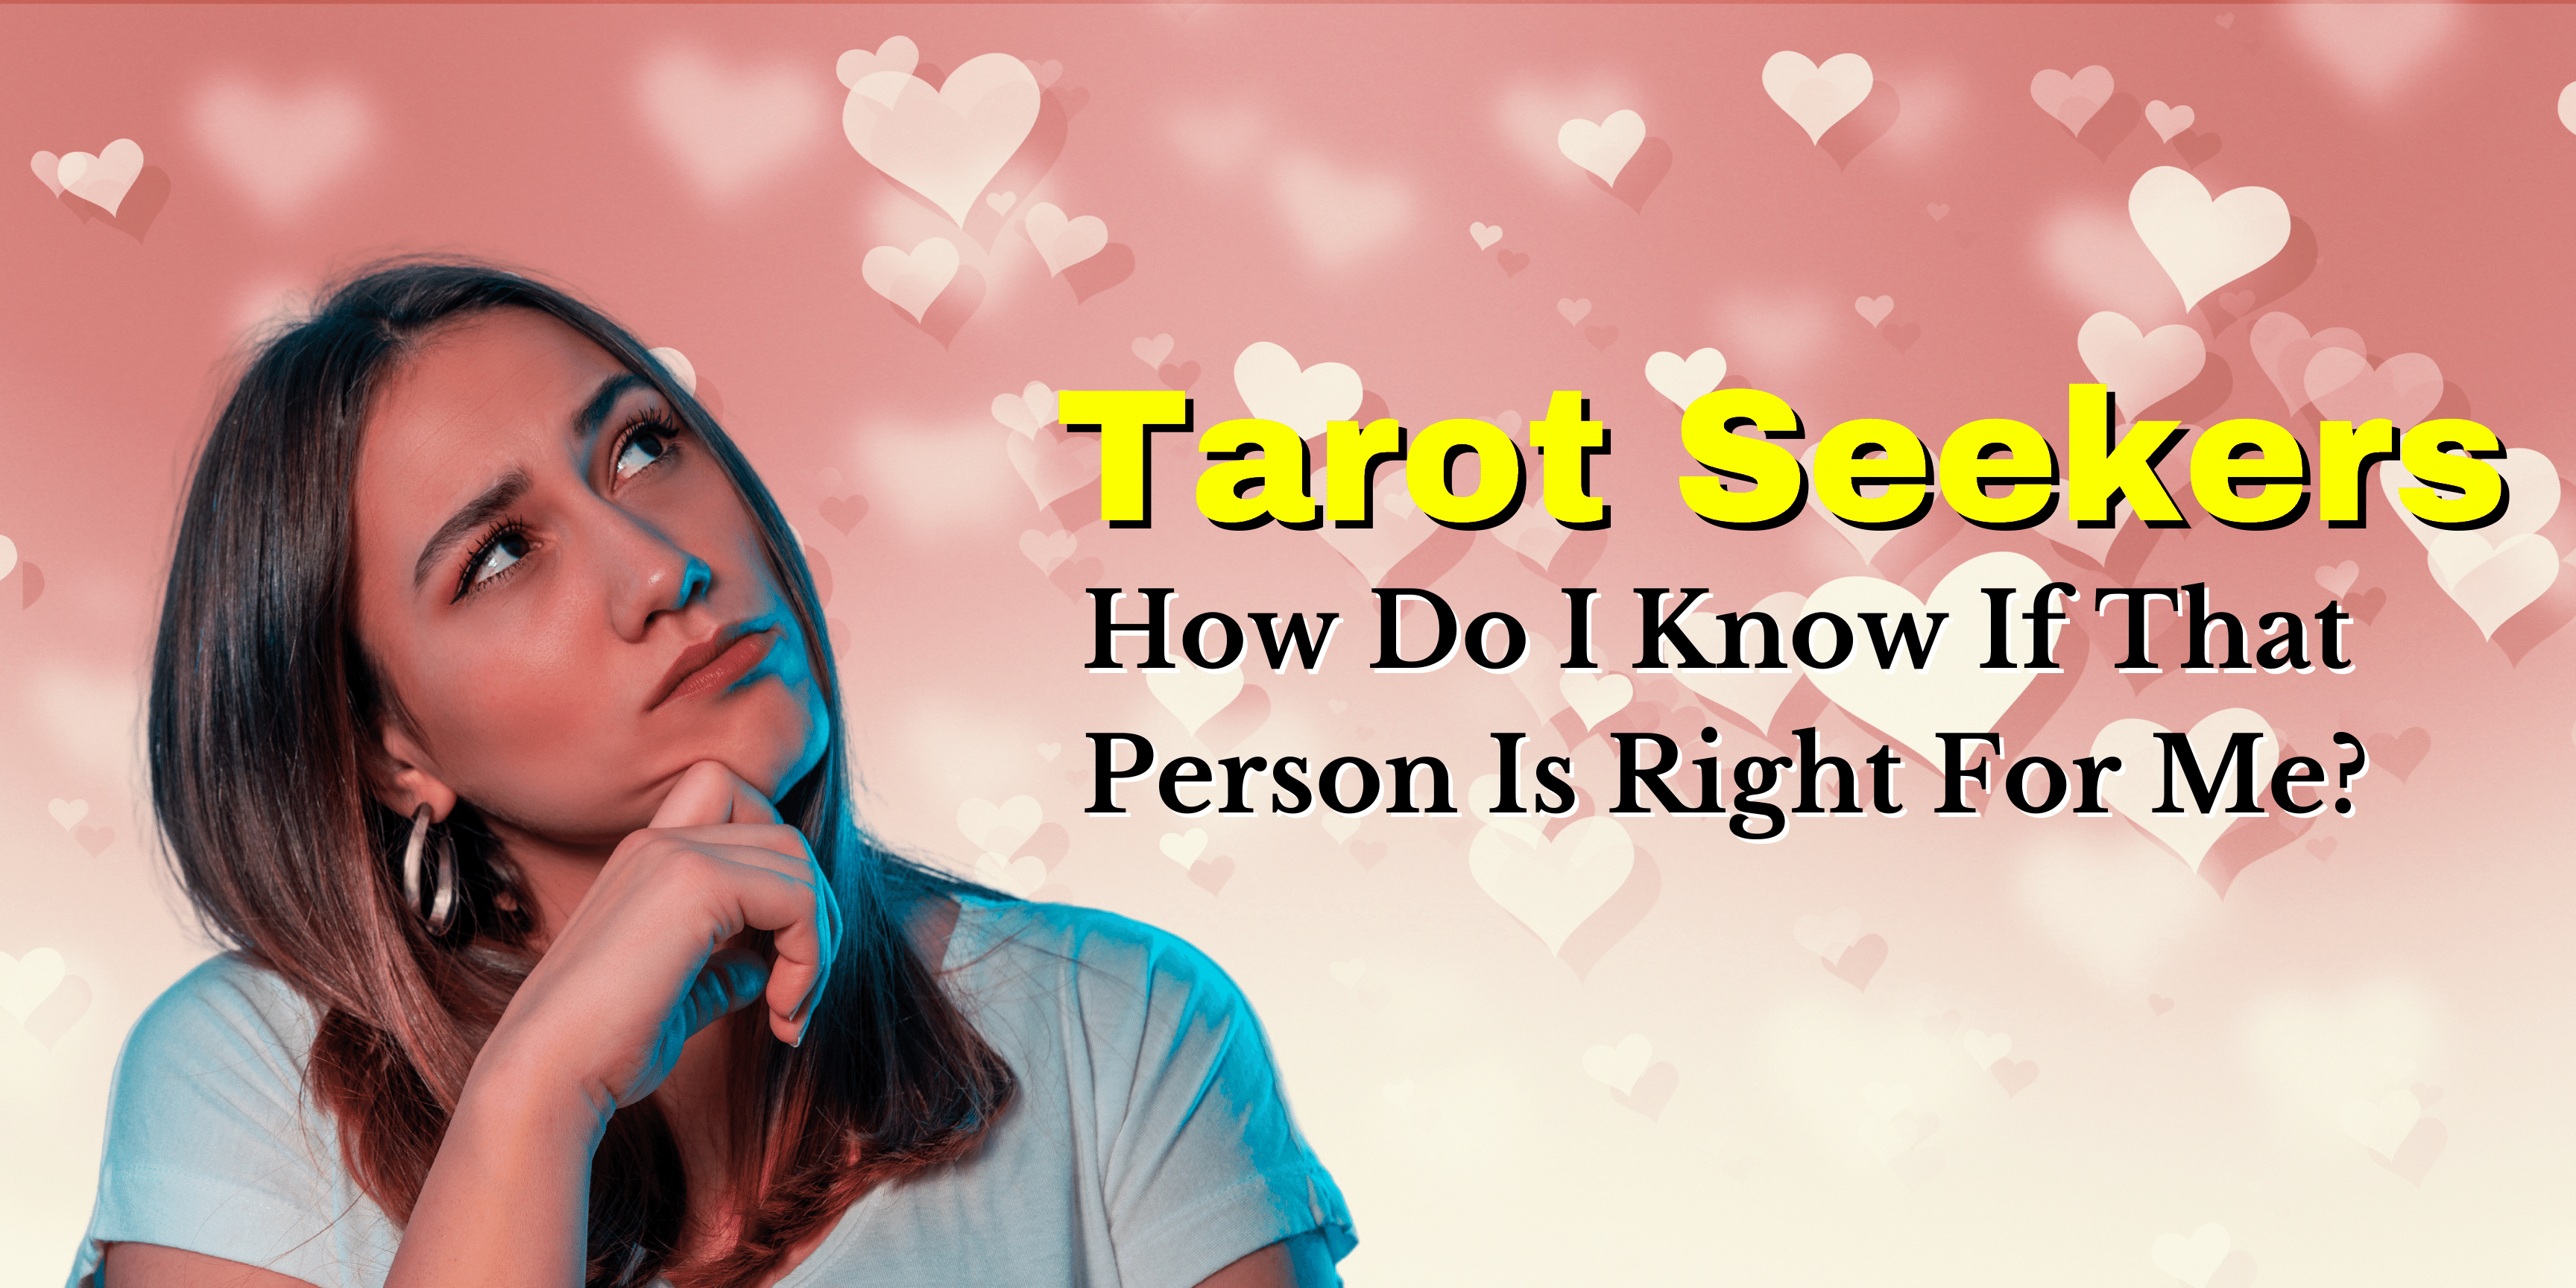 tarot seekers : how do i know if that person is right for me?